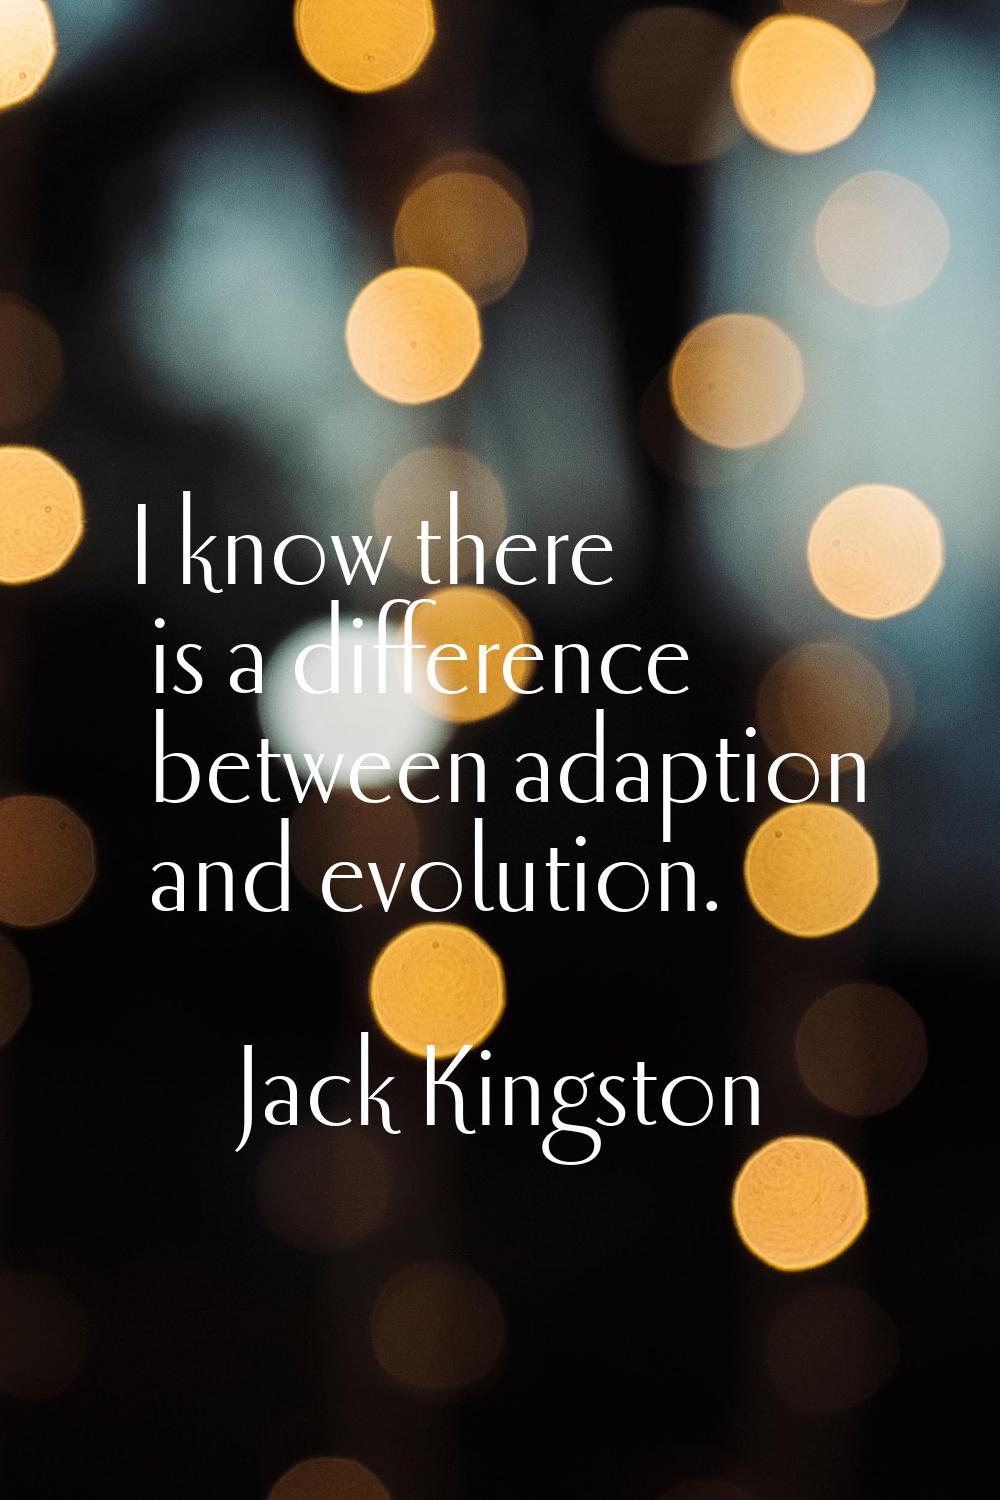 I know there is a difference between adaption and evolution.